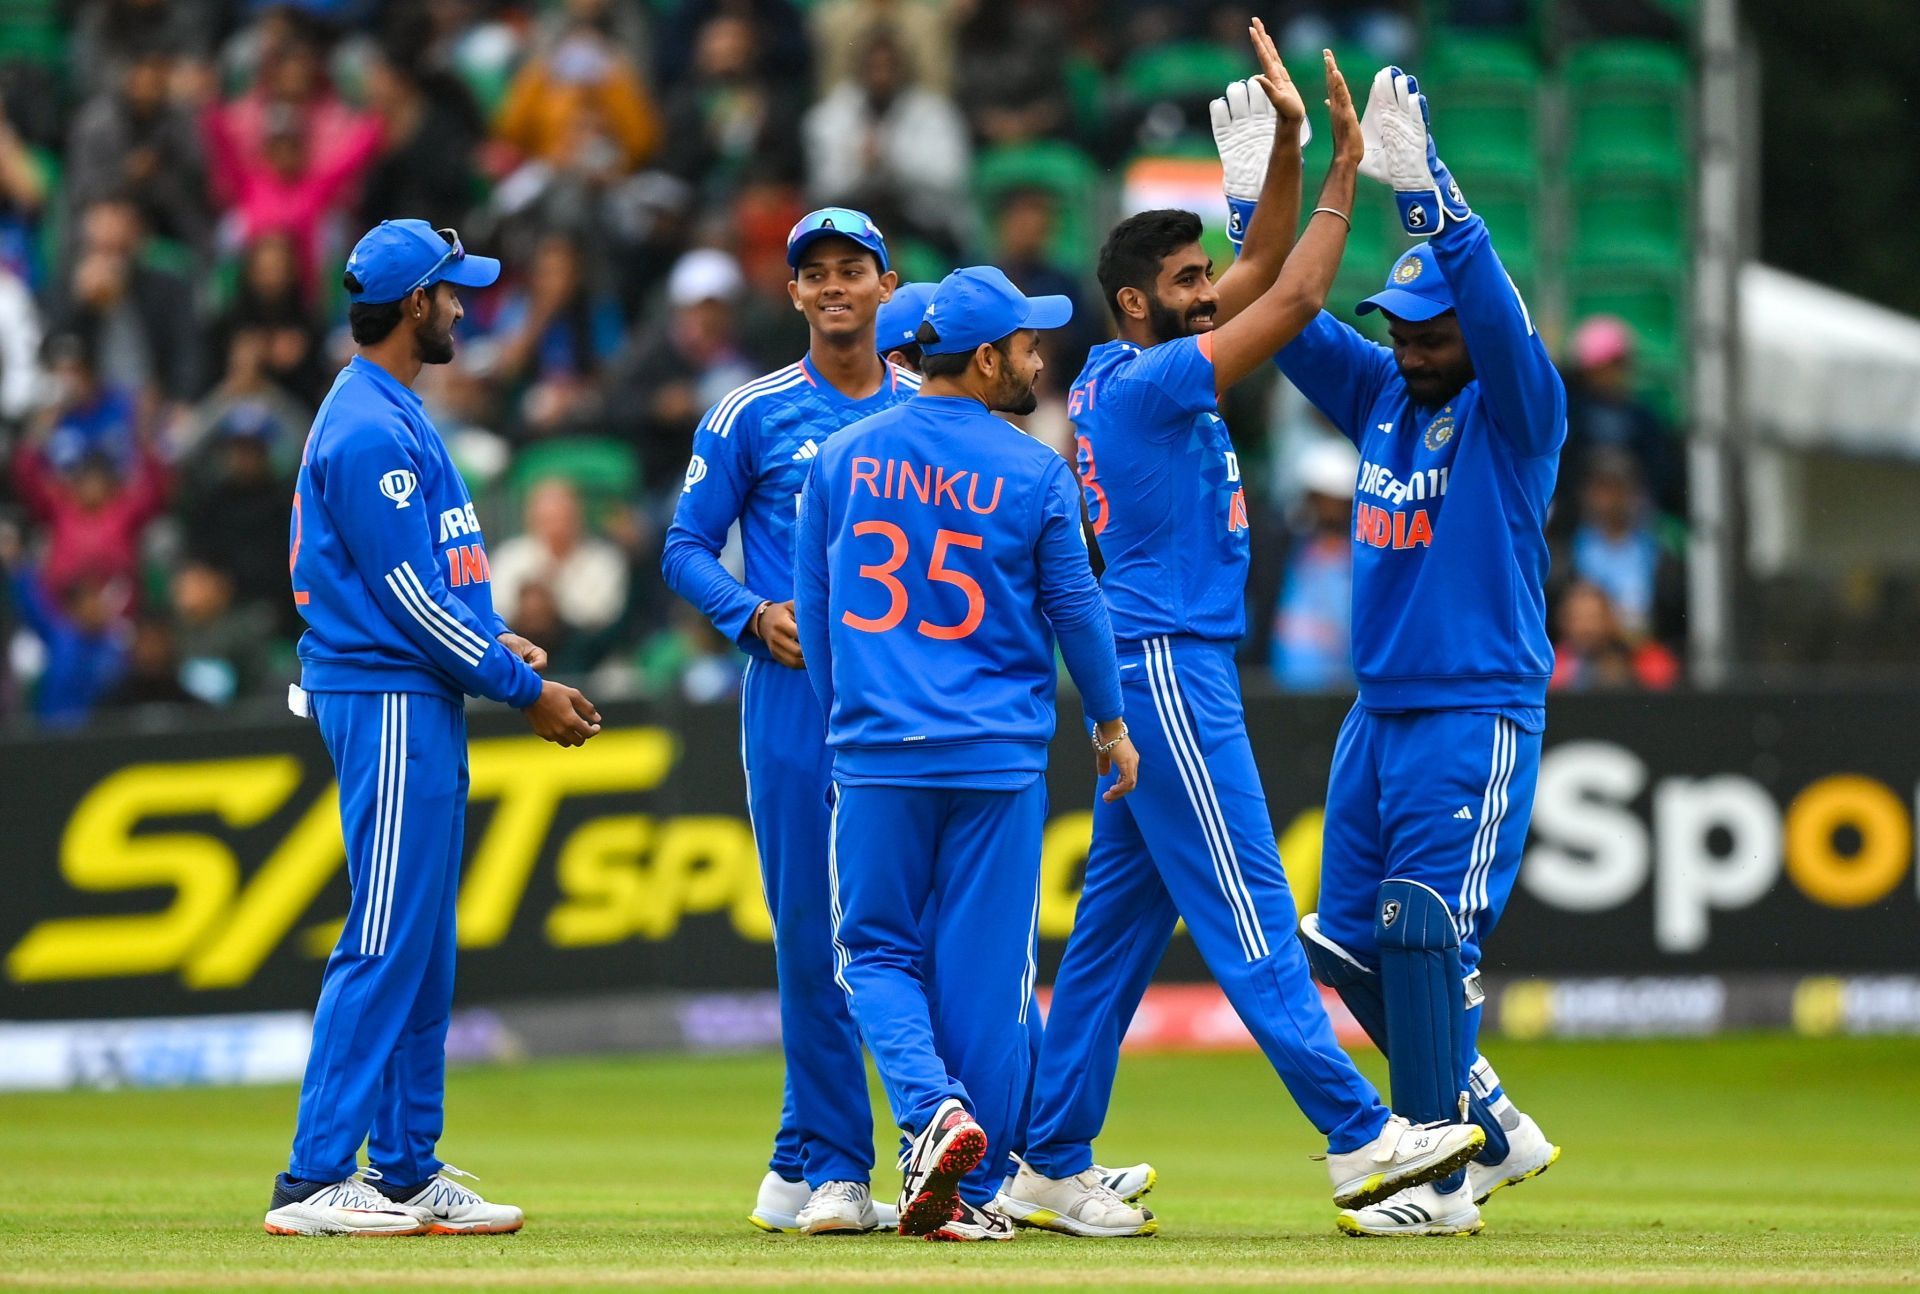 Jasprit Bumrah provided two breakthroughs in the first over of his return